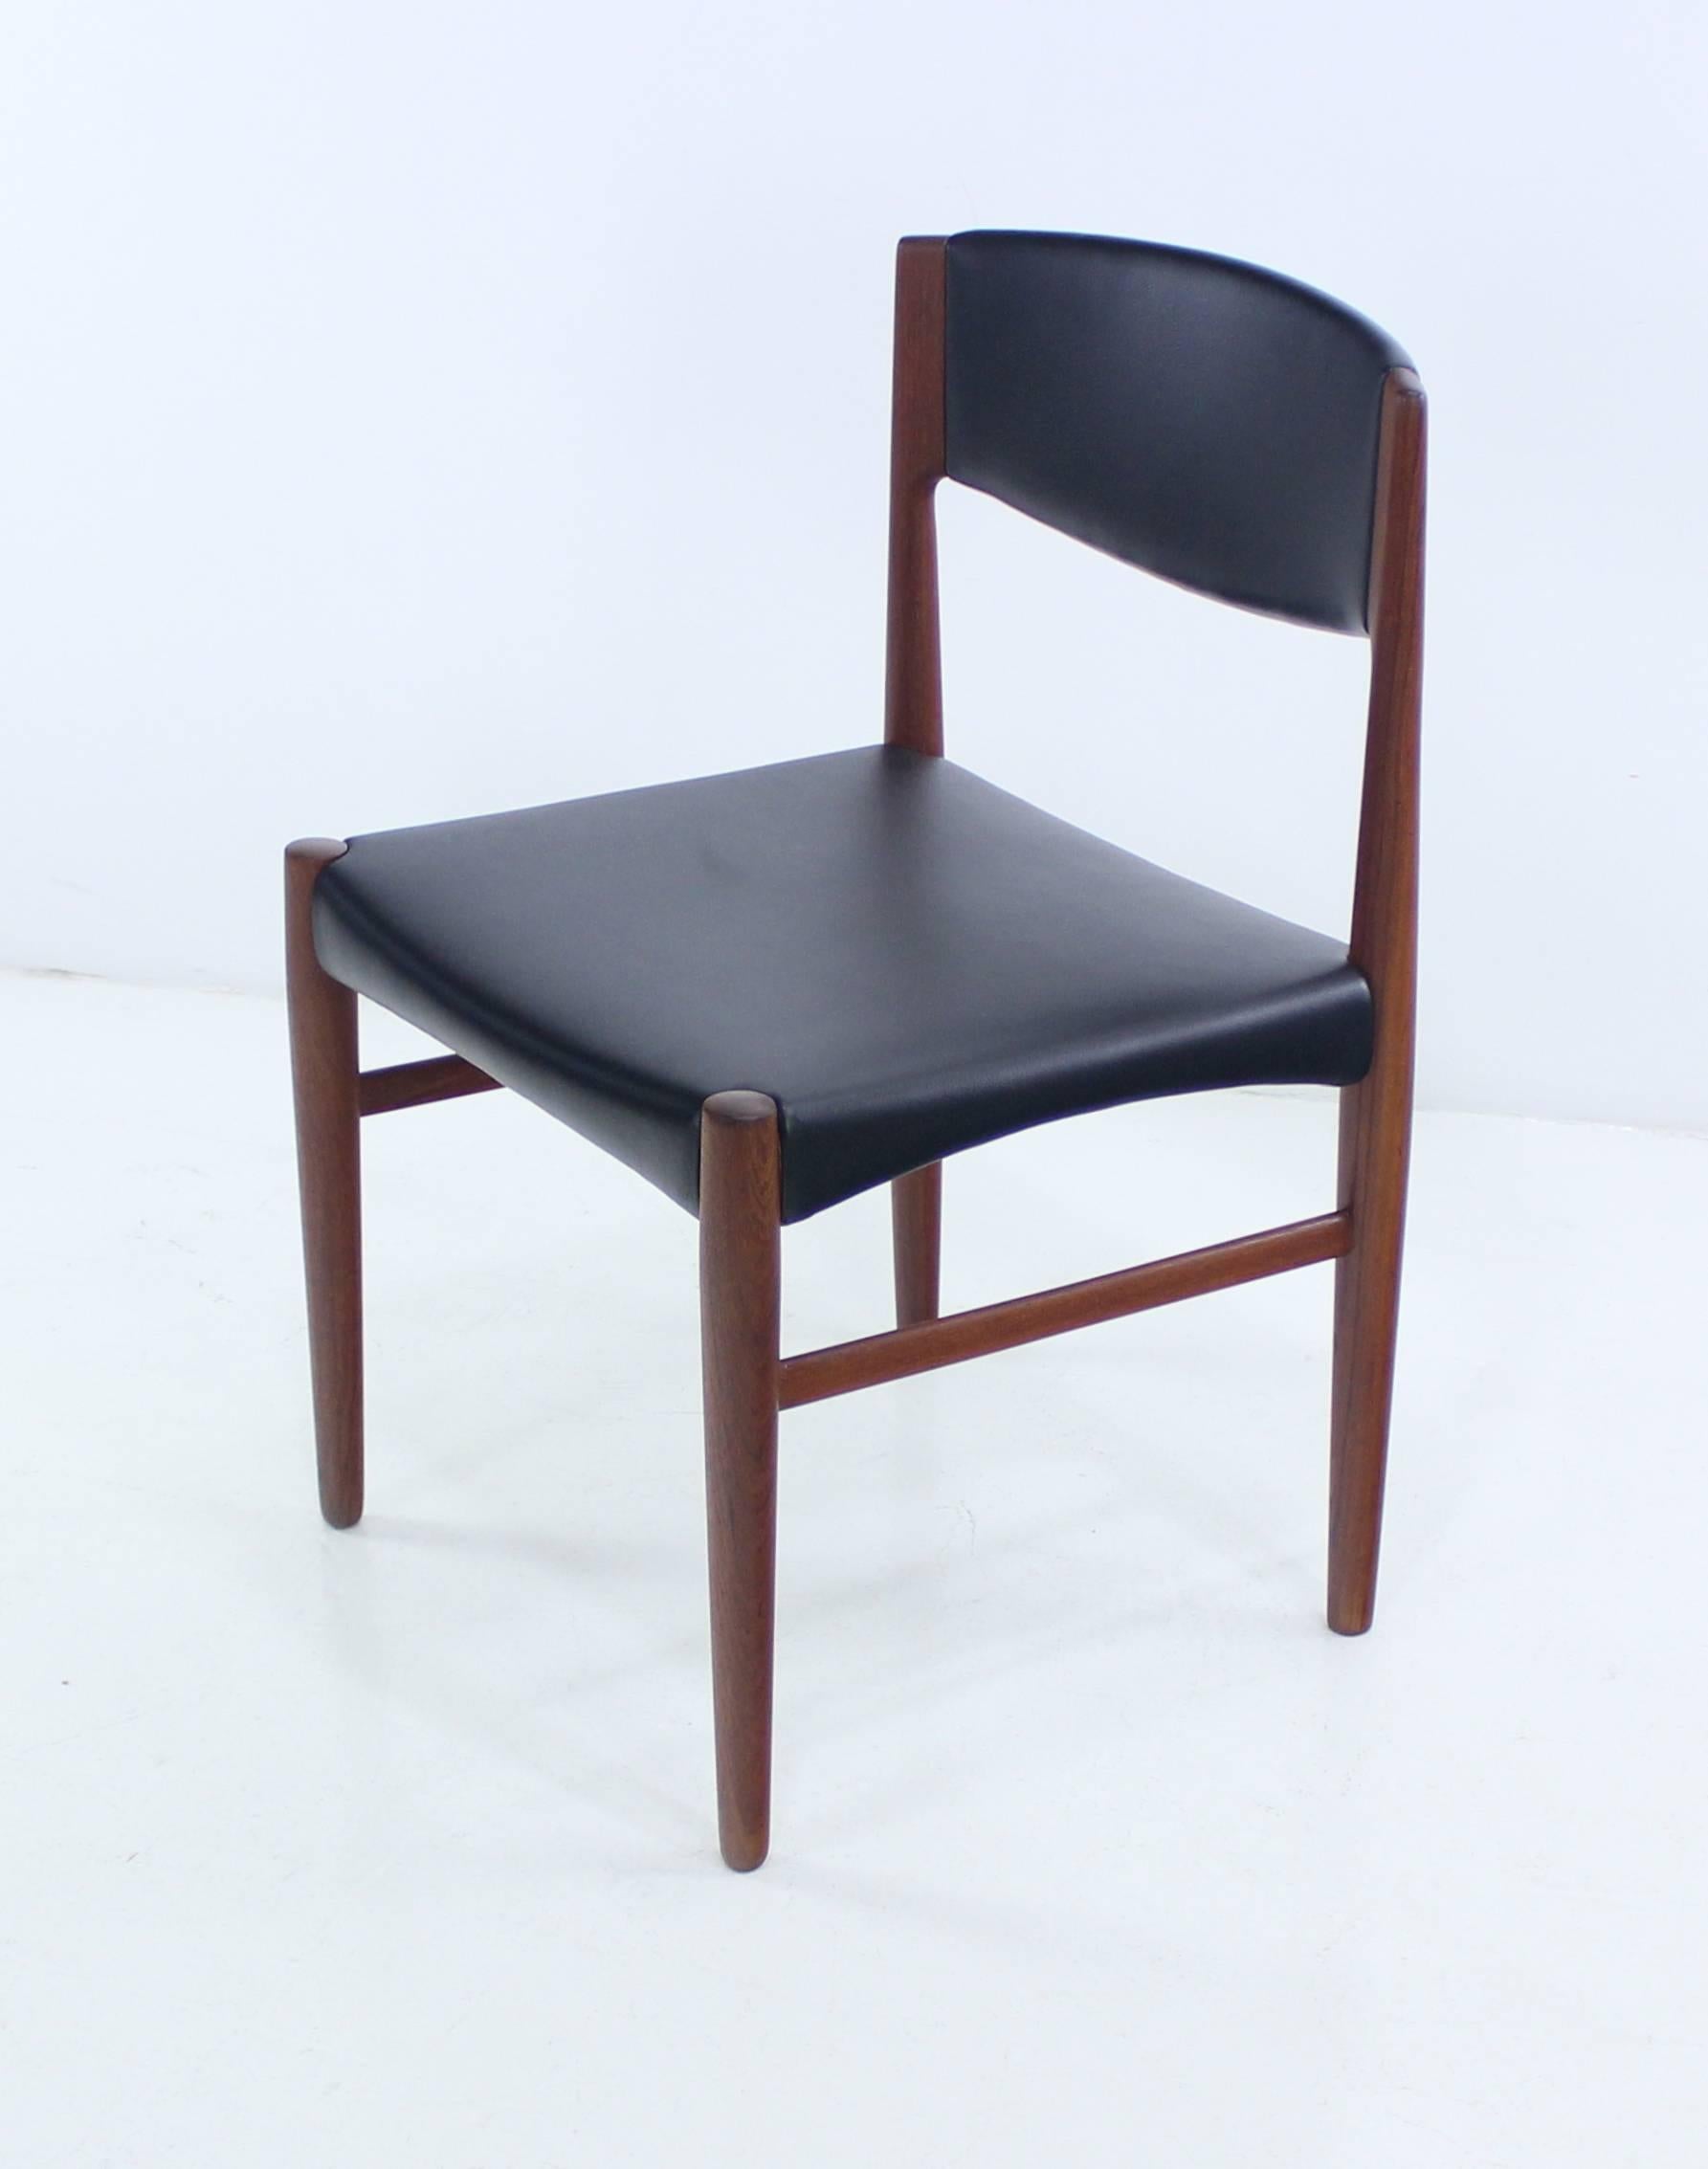 Six Danish modern dining chairs. Glostrup Mobelfabrik, maker.
Rich, dark teak frames.
Curved backs and seats newly upholstered in highest quality black leatherette.
Professionally restored and refinished by LookModern.
Matchless quality and